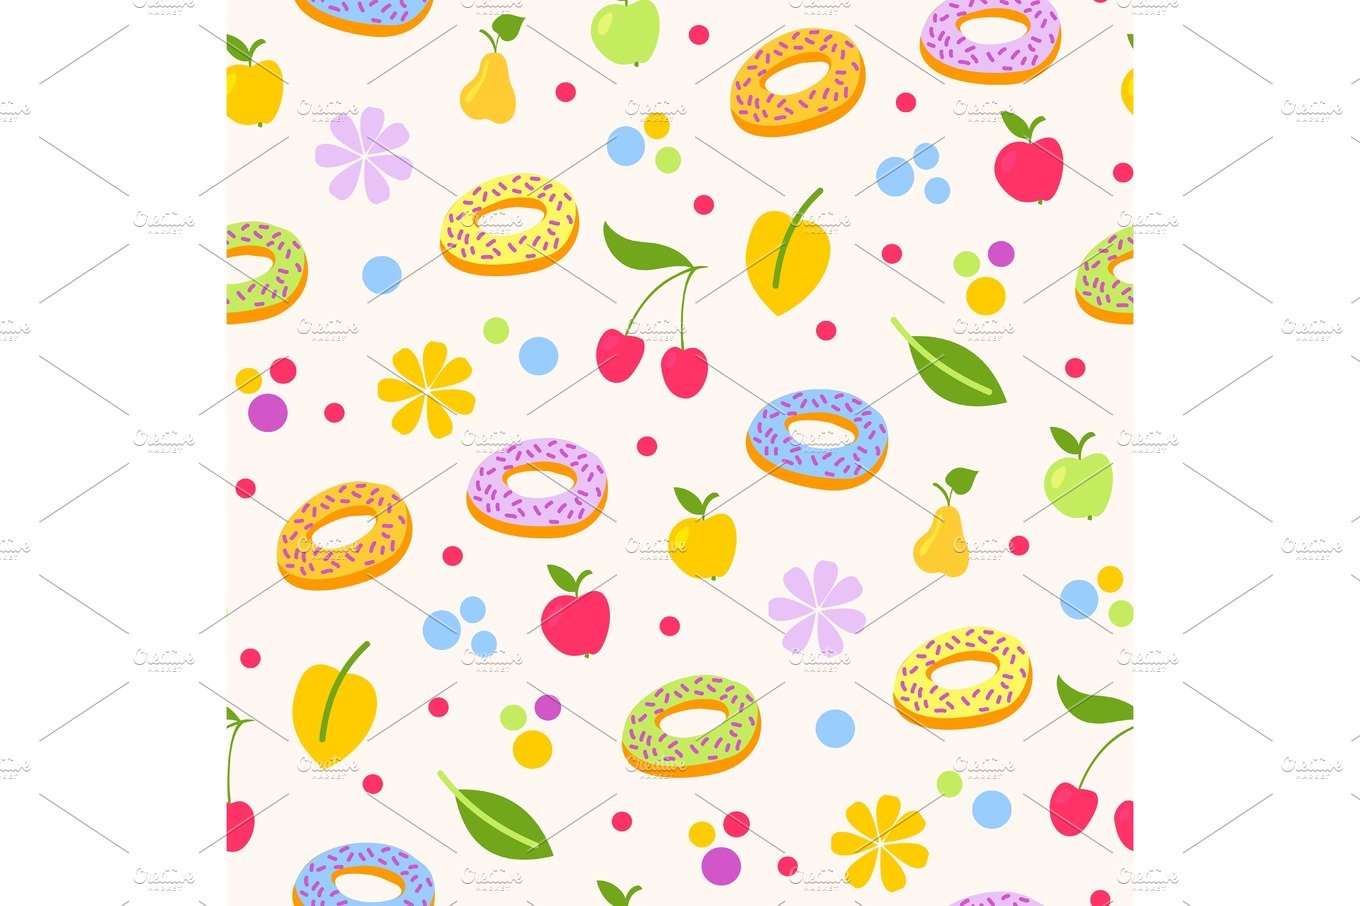 Donuts tasty coockie seeamless pattern vector background cover image.